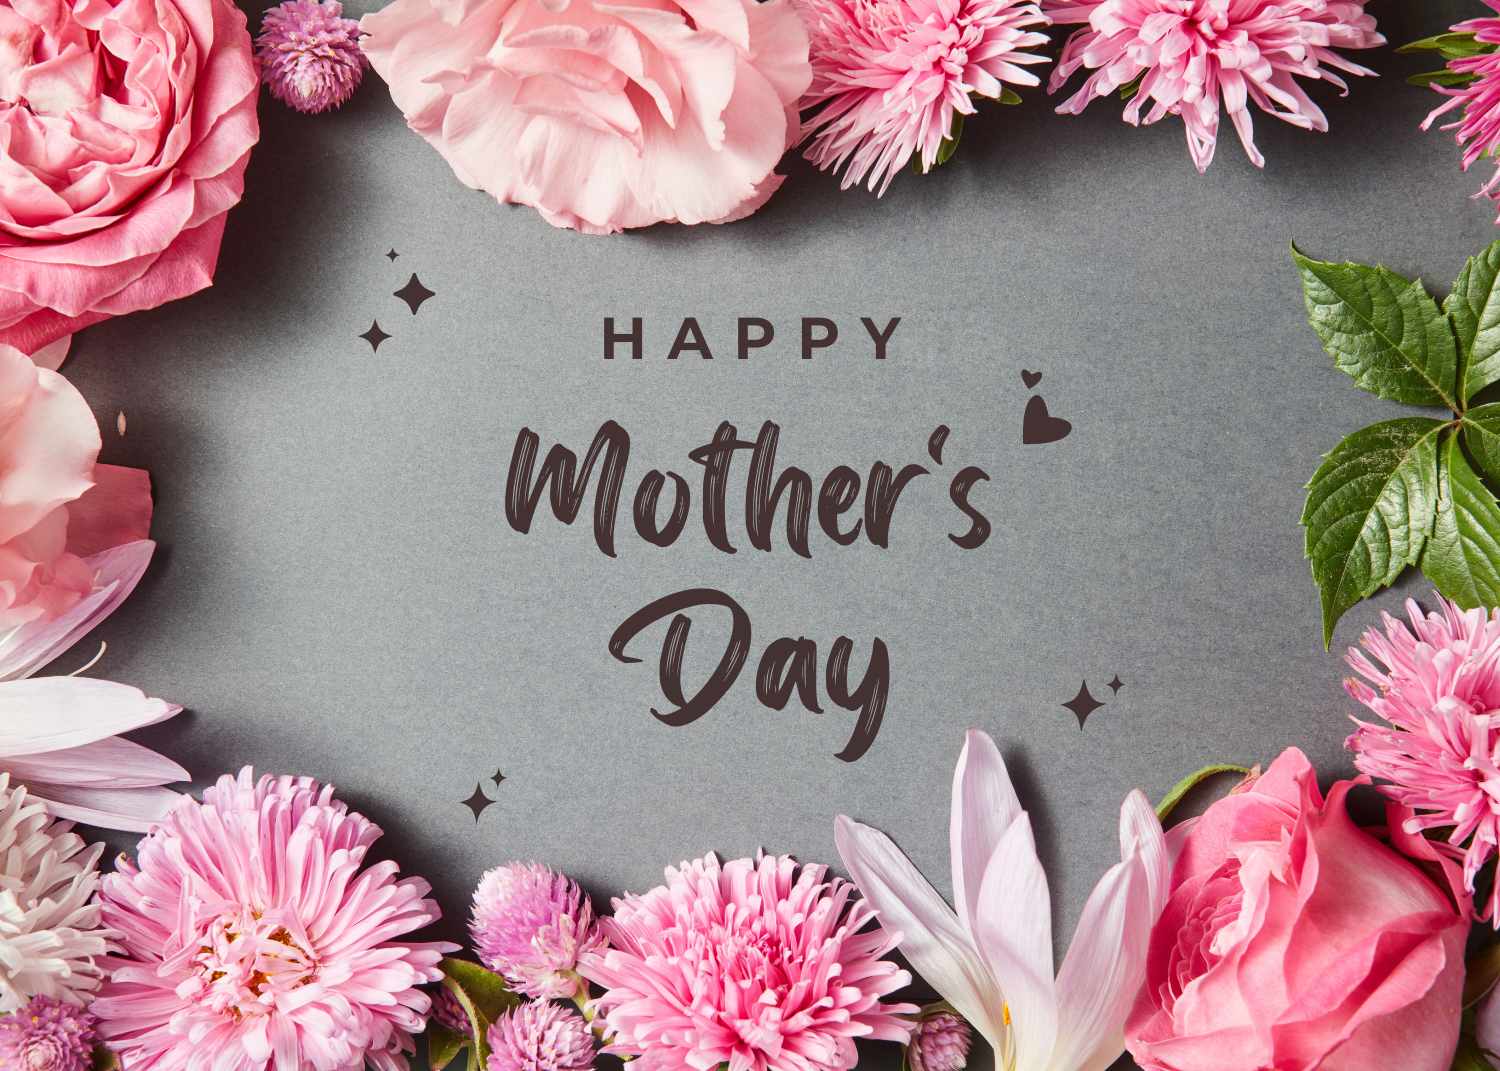 A Loving Gesture: Celebrating Our Community’s Mothers with Thoughtful ...